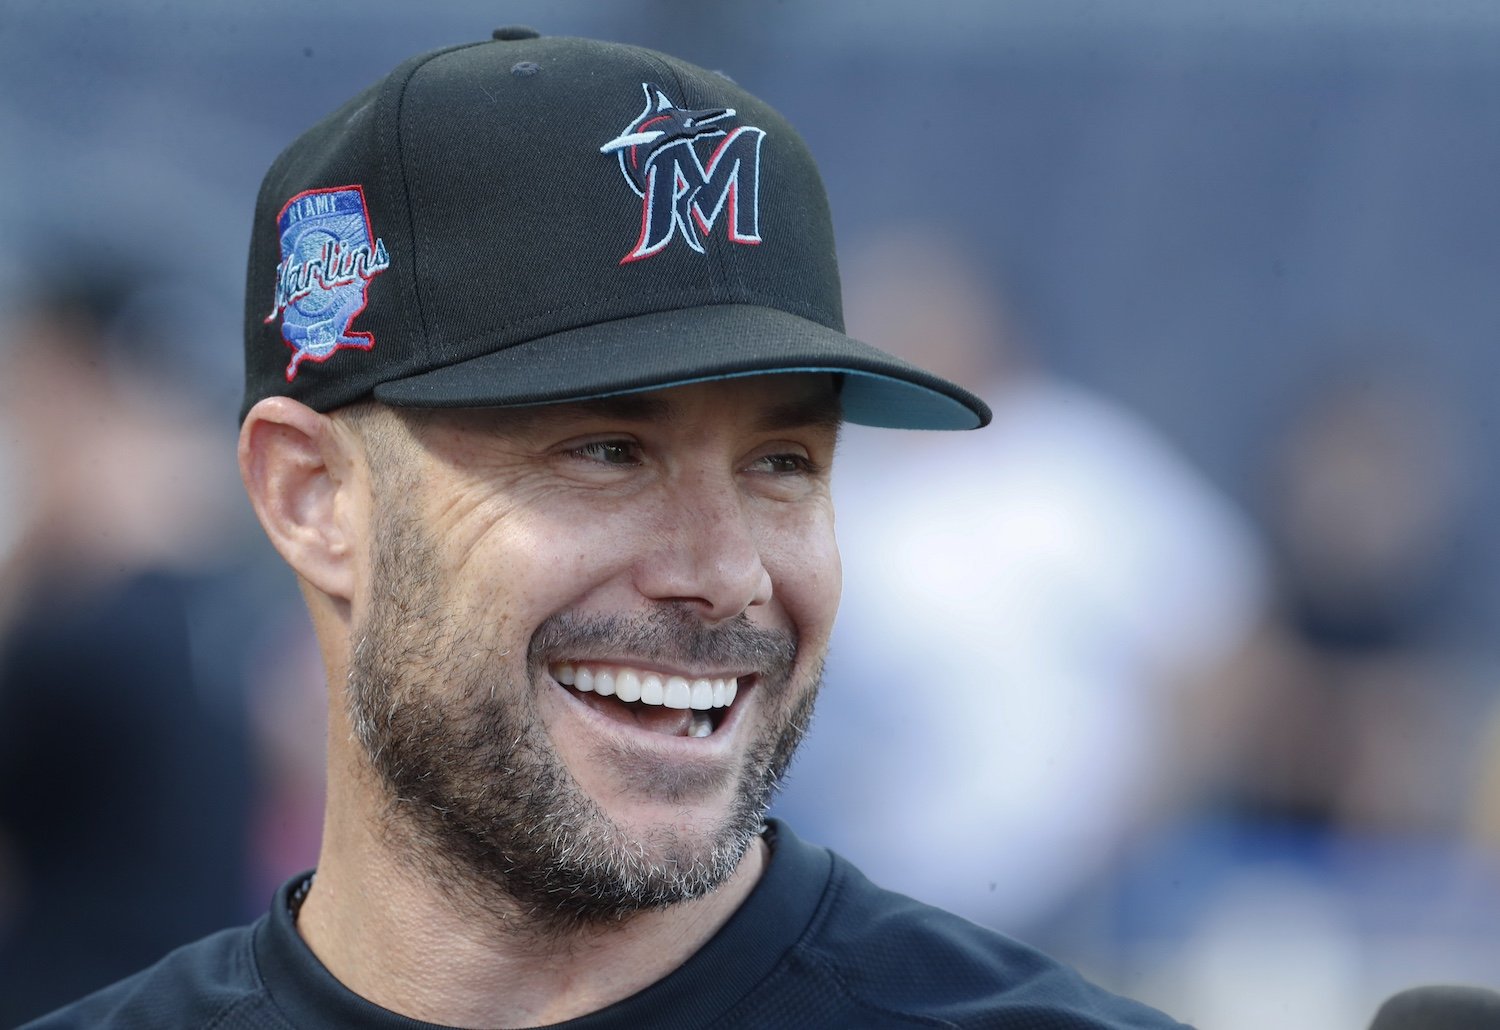 Marlins announce full 2024 coaching staff Marlins Fish On First